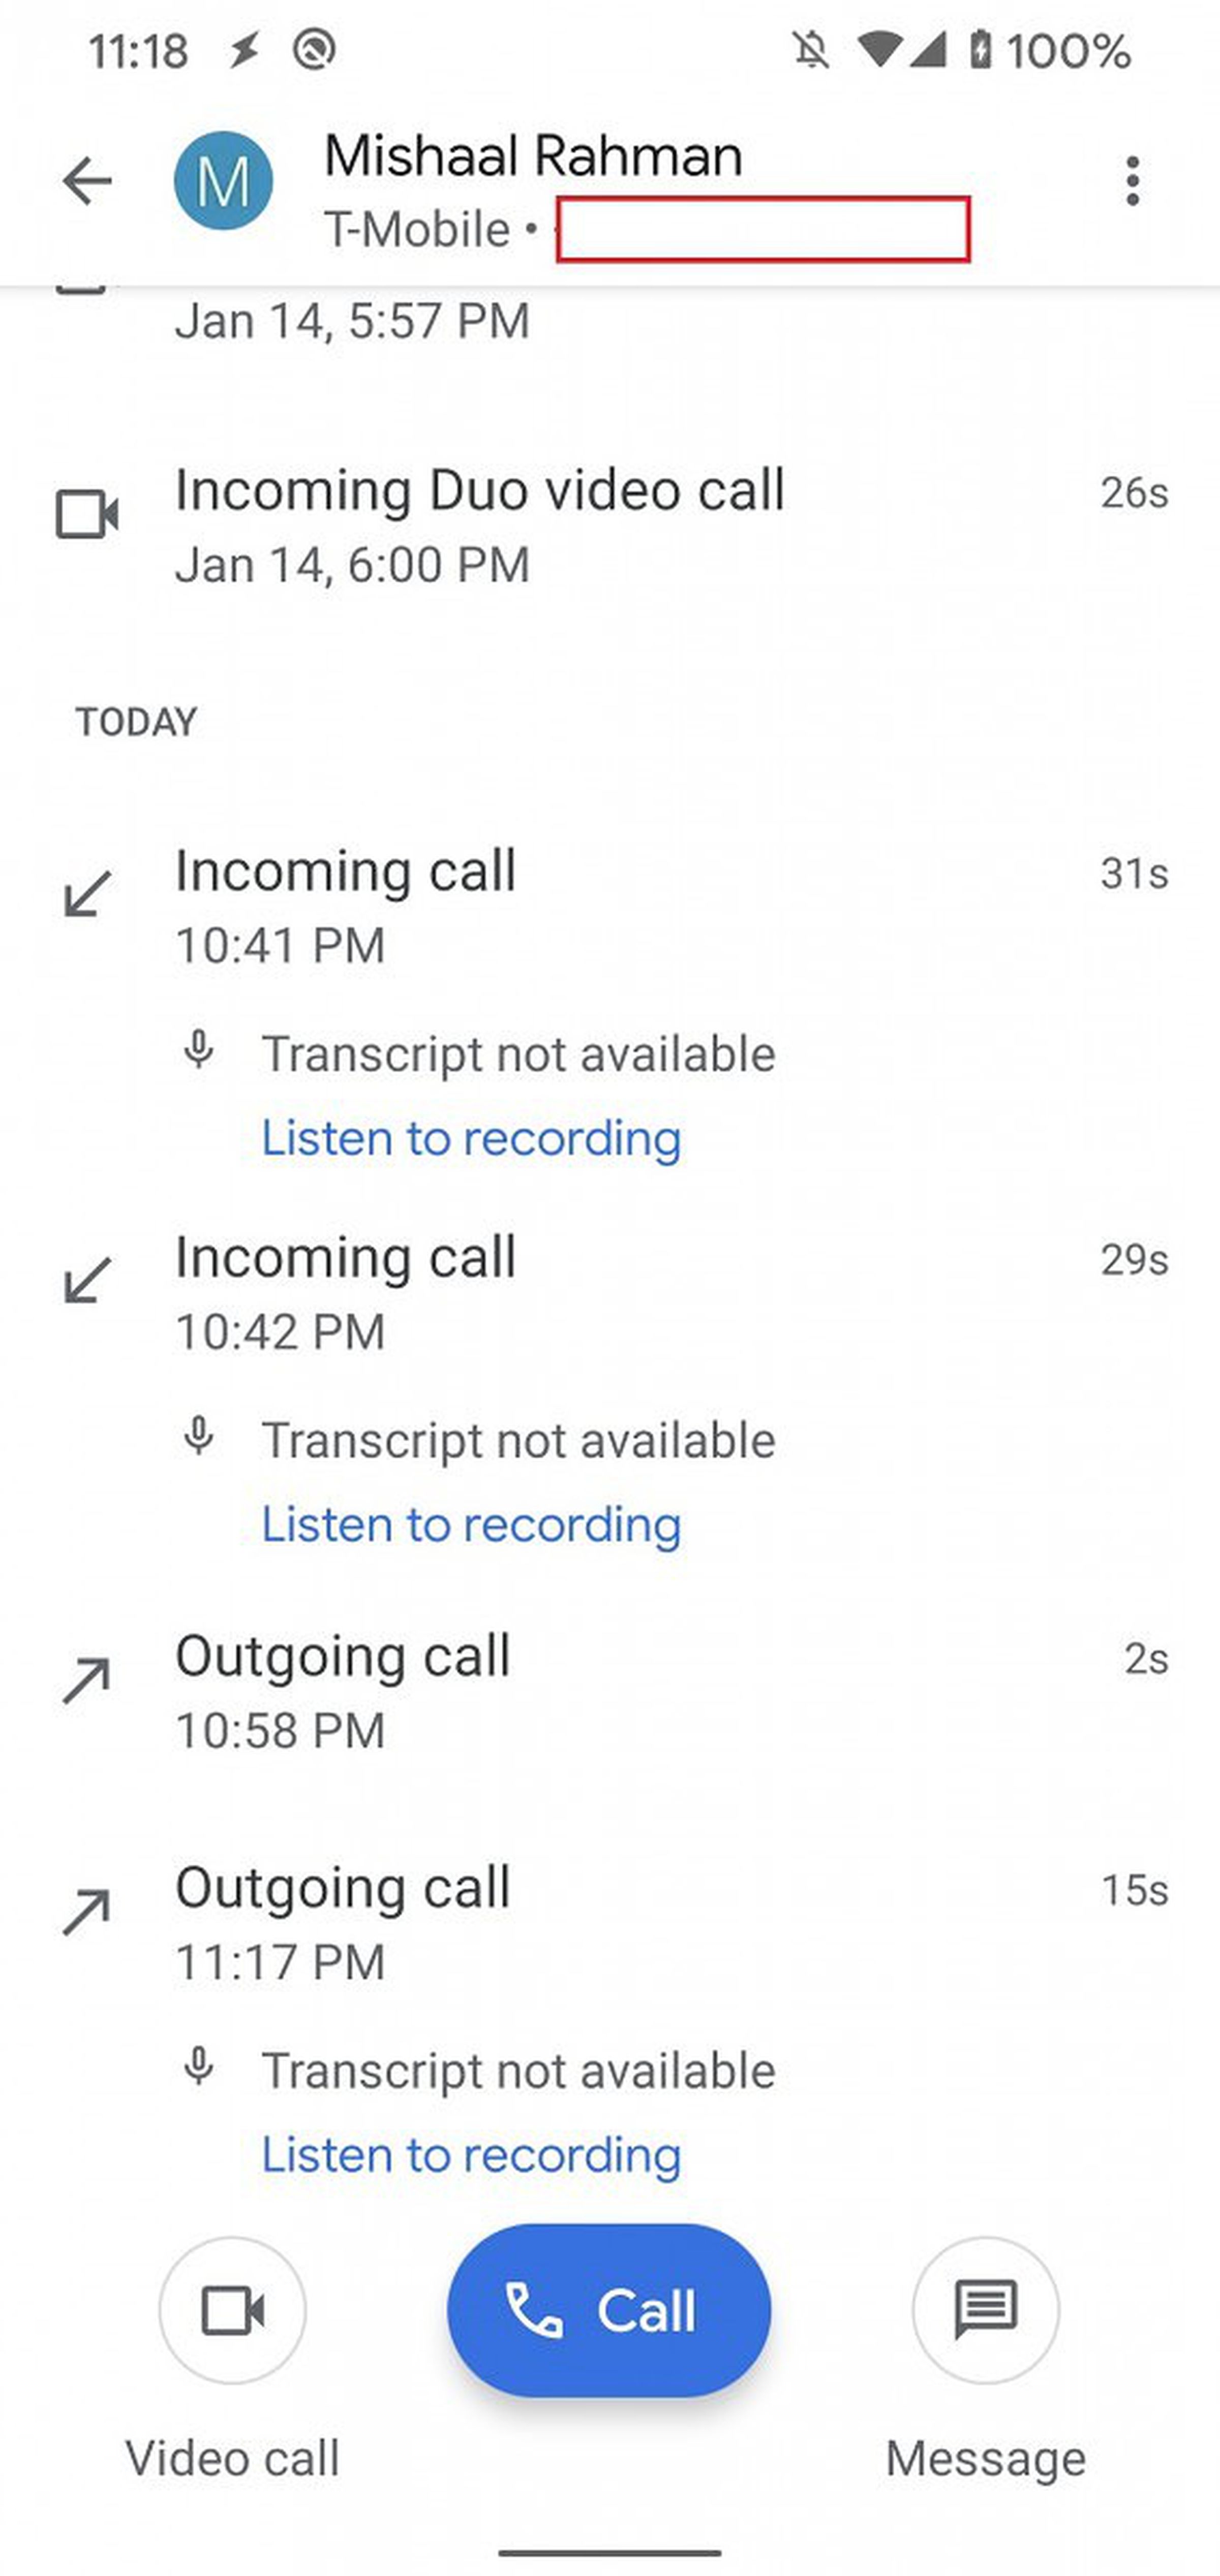 Afterwards, the recordings and transcriptions could be accessible from the call log.